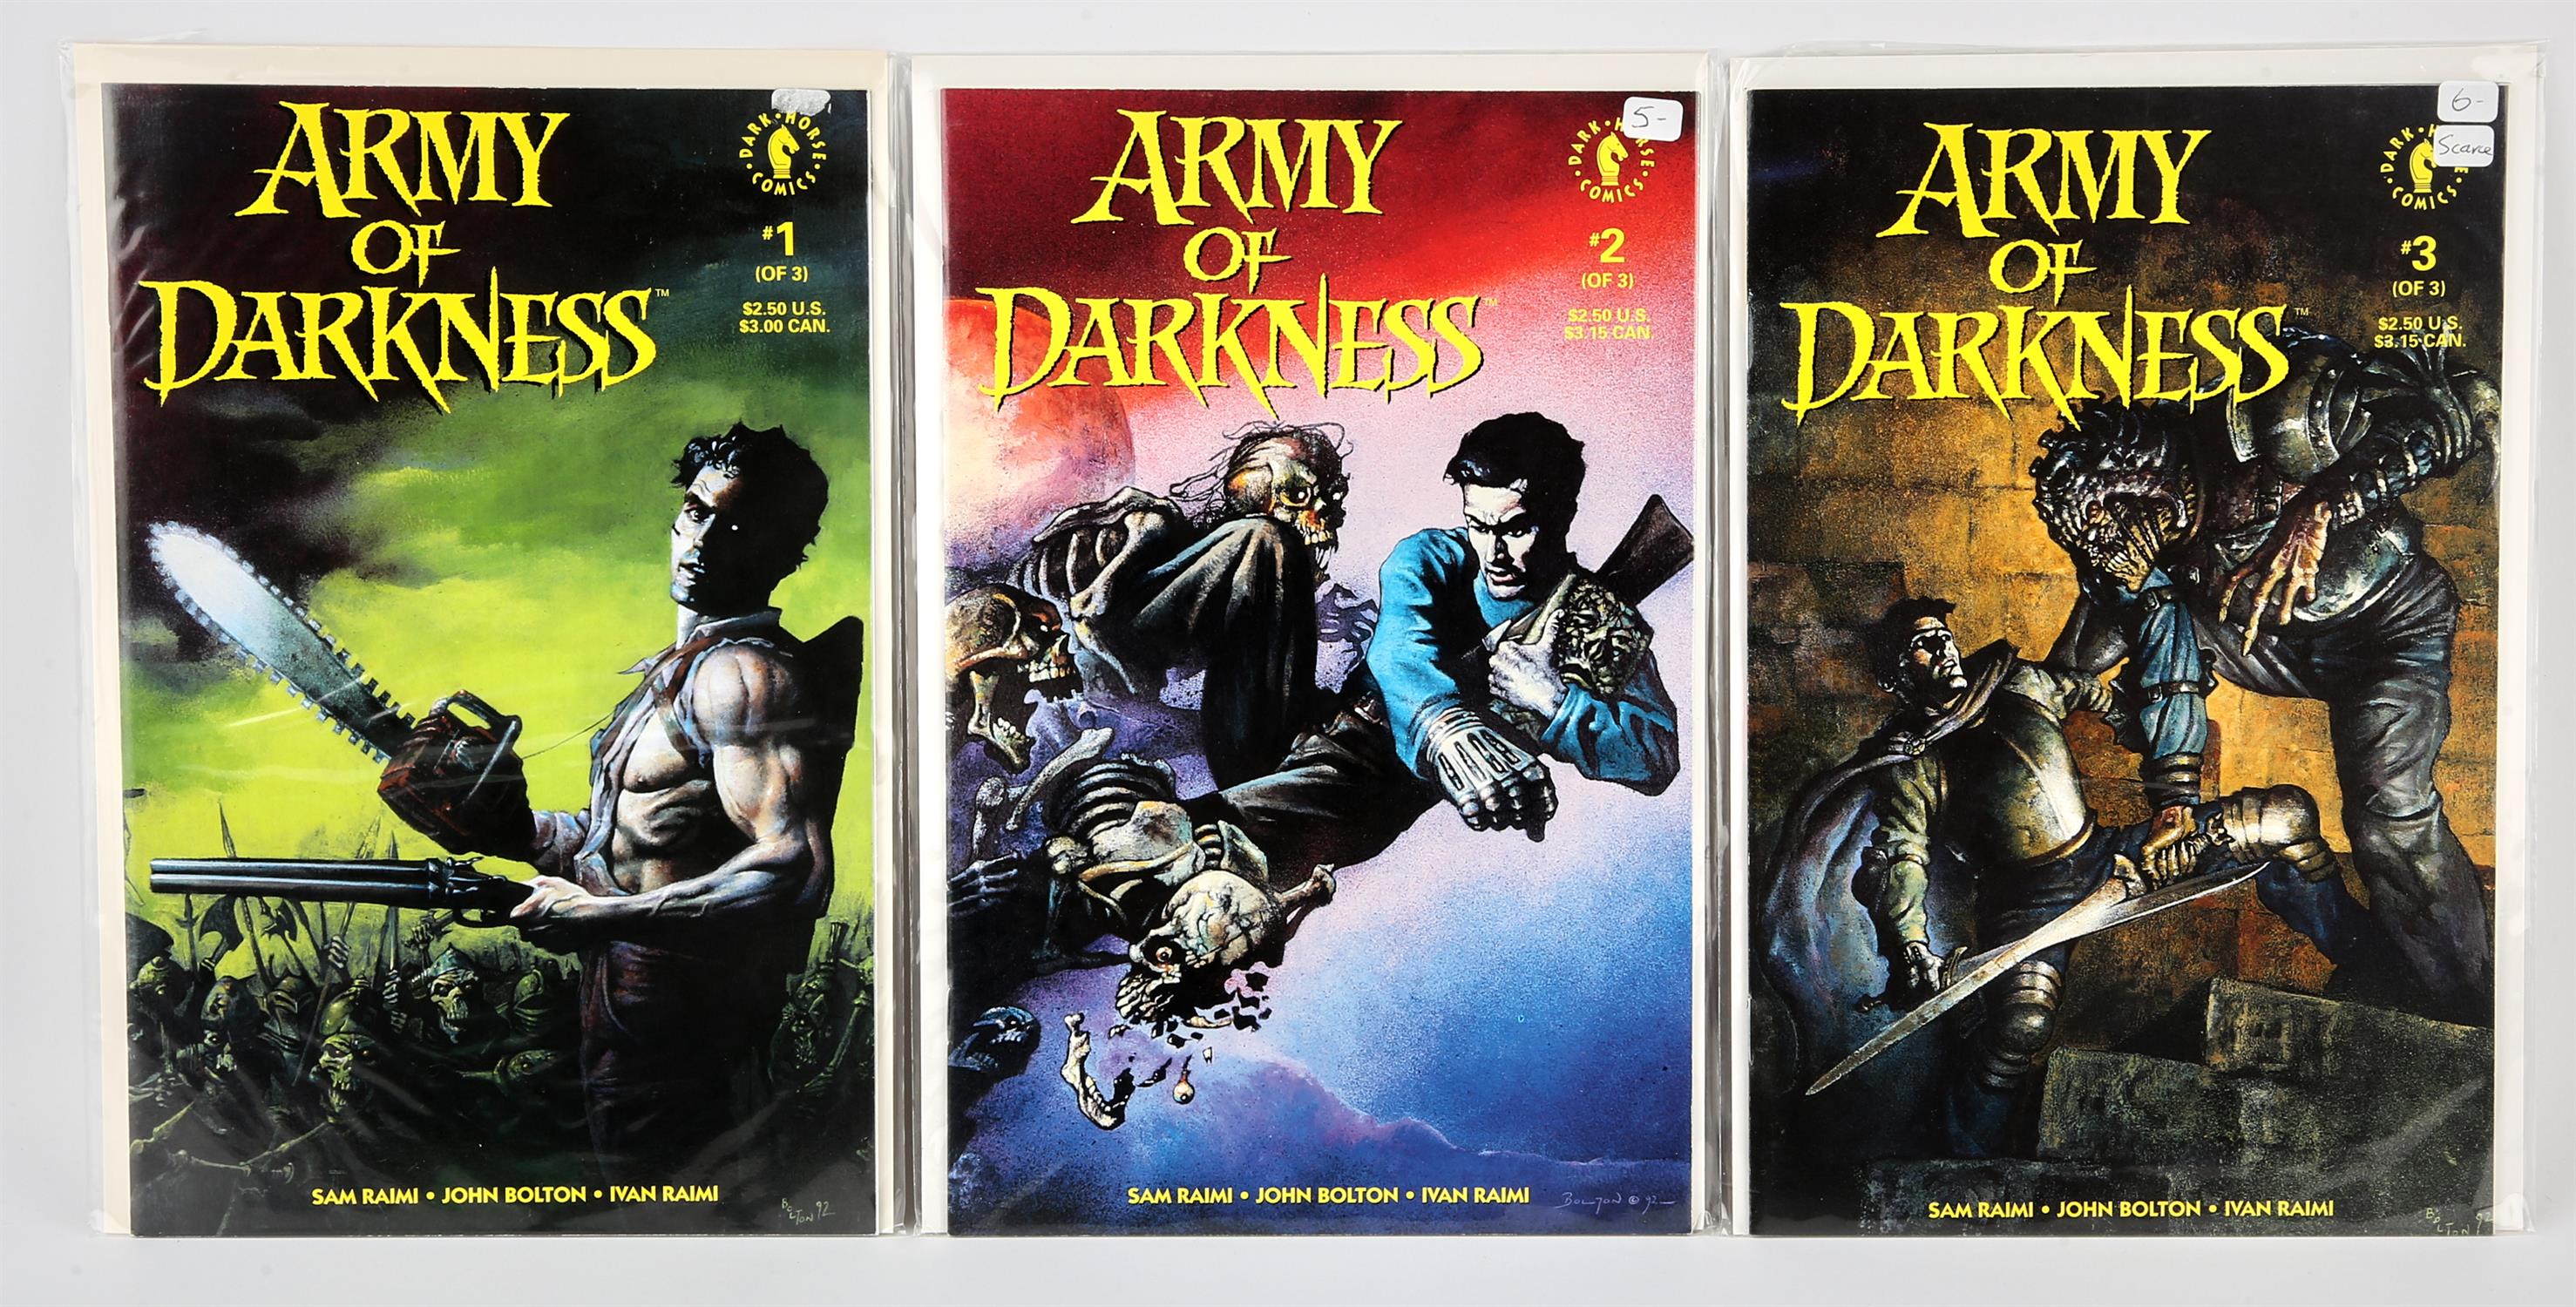 Dark Horse Comics: Army of Darkness Nos. 1,2 & 3 (1992). The 1st appearance of the Army of